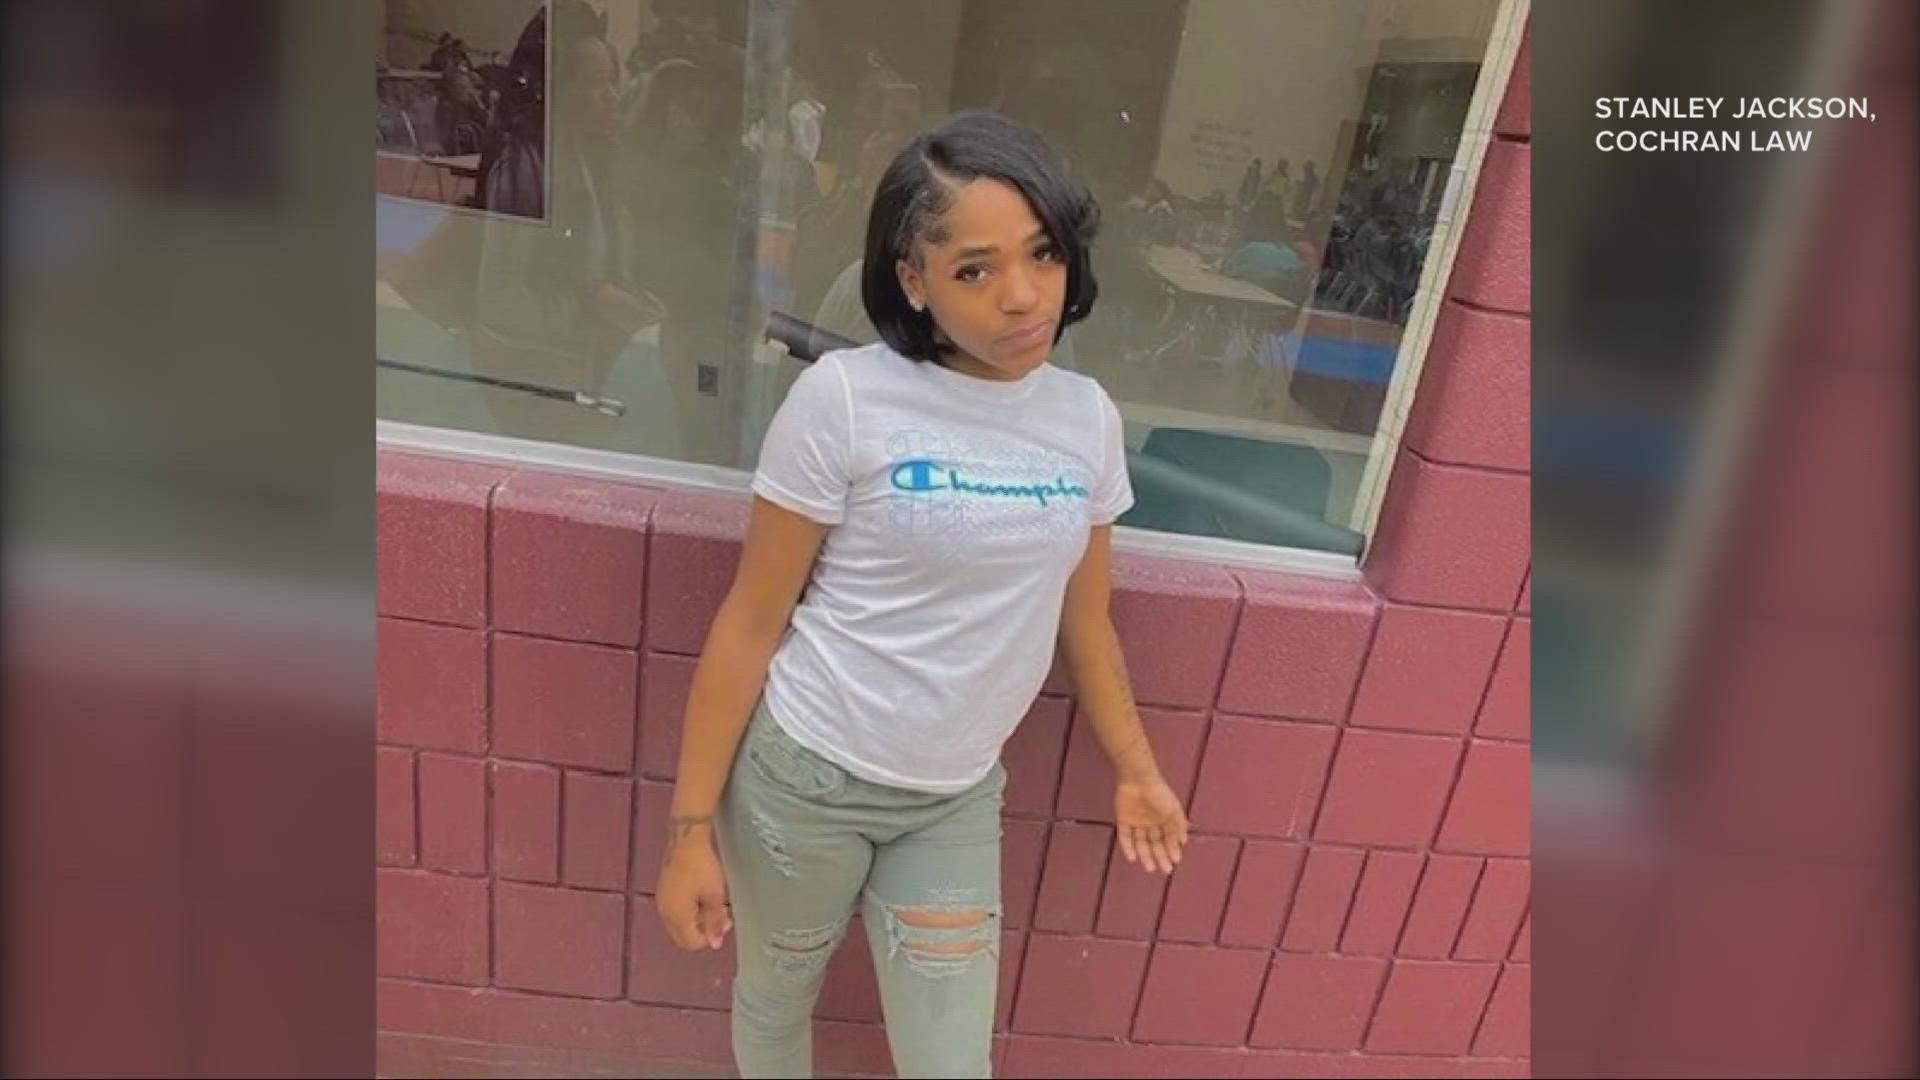 One of the victims was the older sister of Tamia Chappman, who was hit and killed while walking home from school in East Cleveland back in 2019.